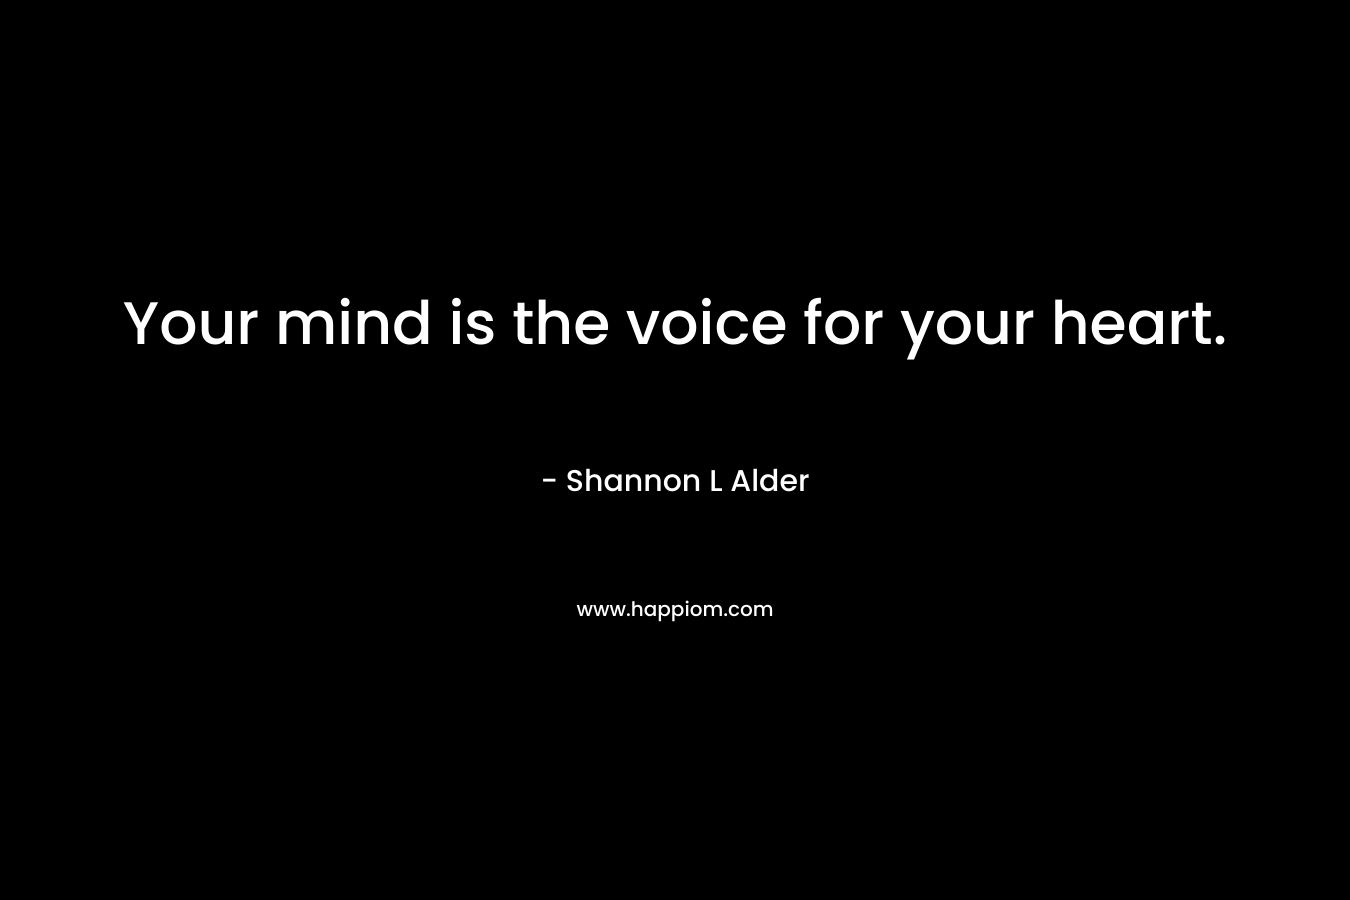 Your mind is the voice for your heart.